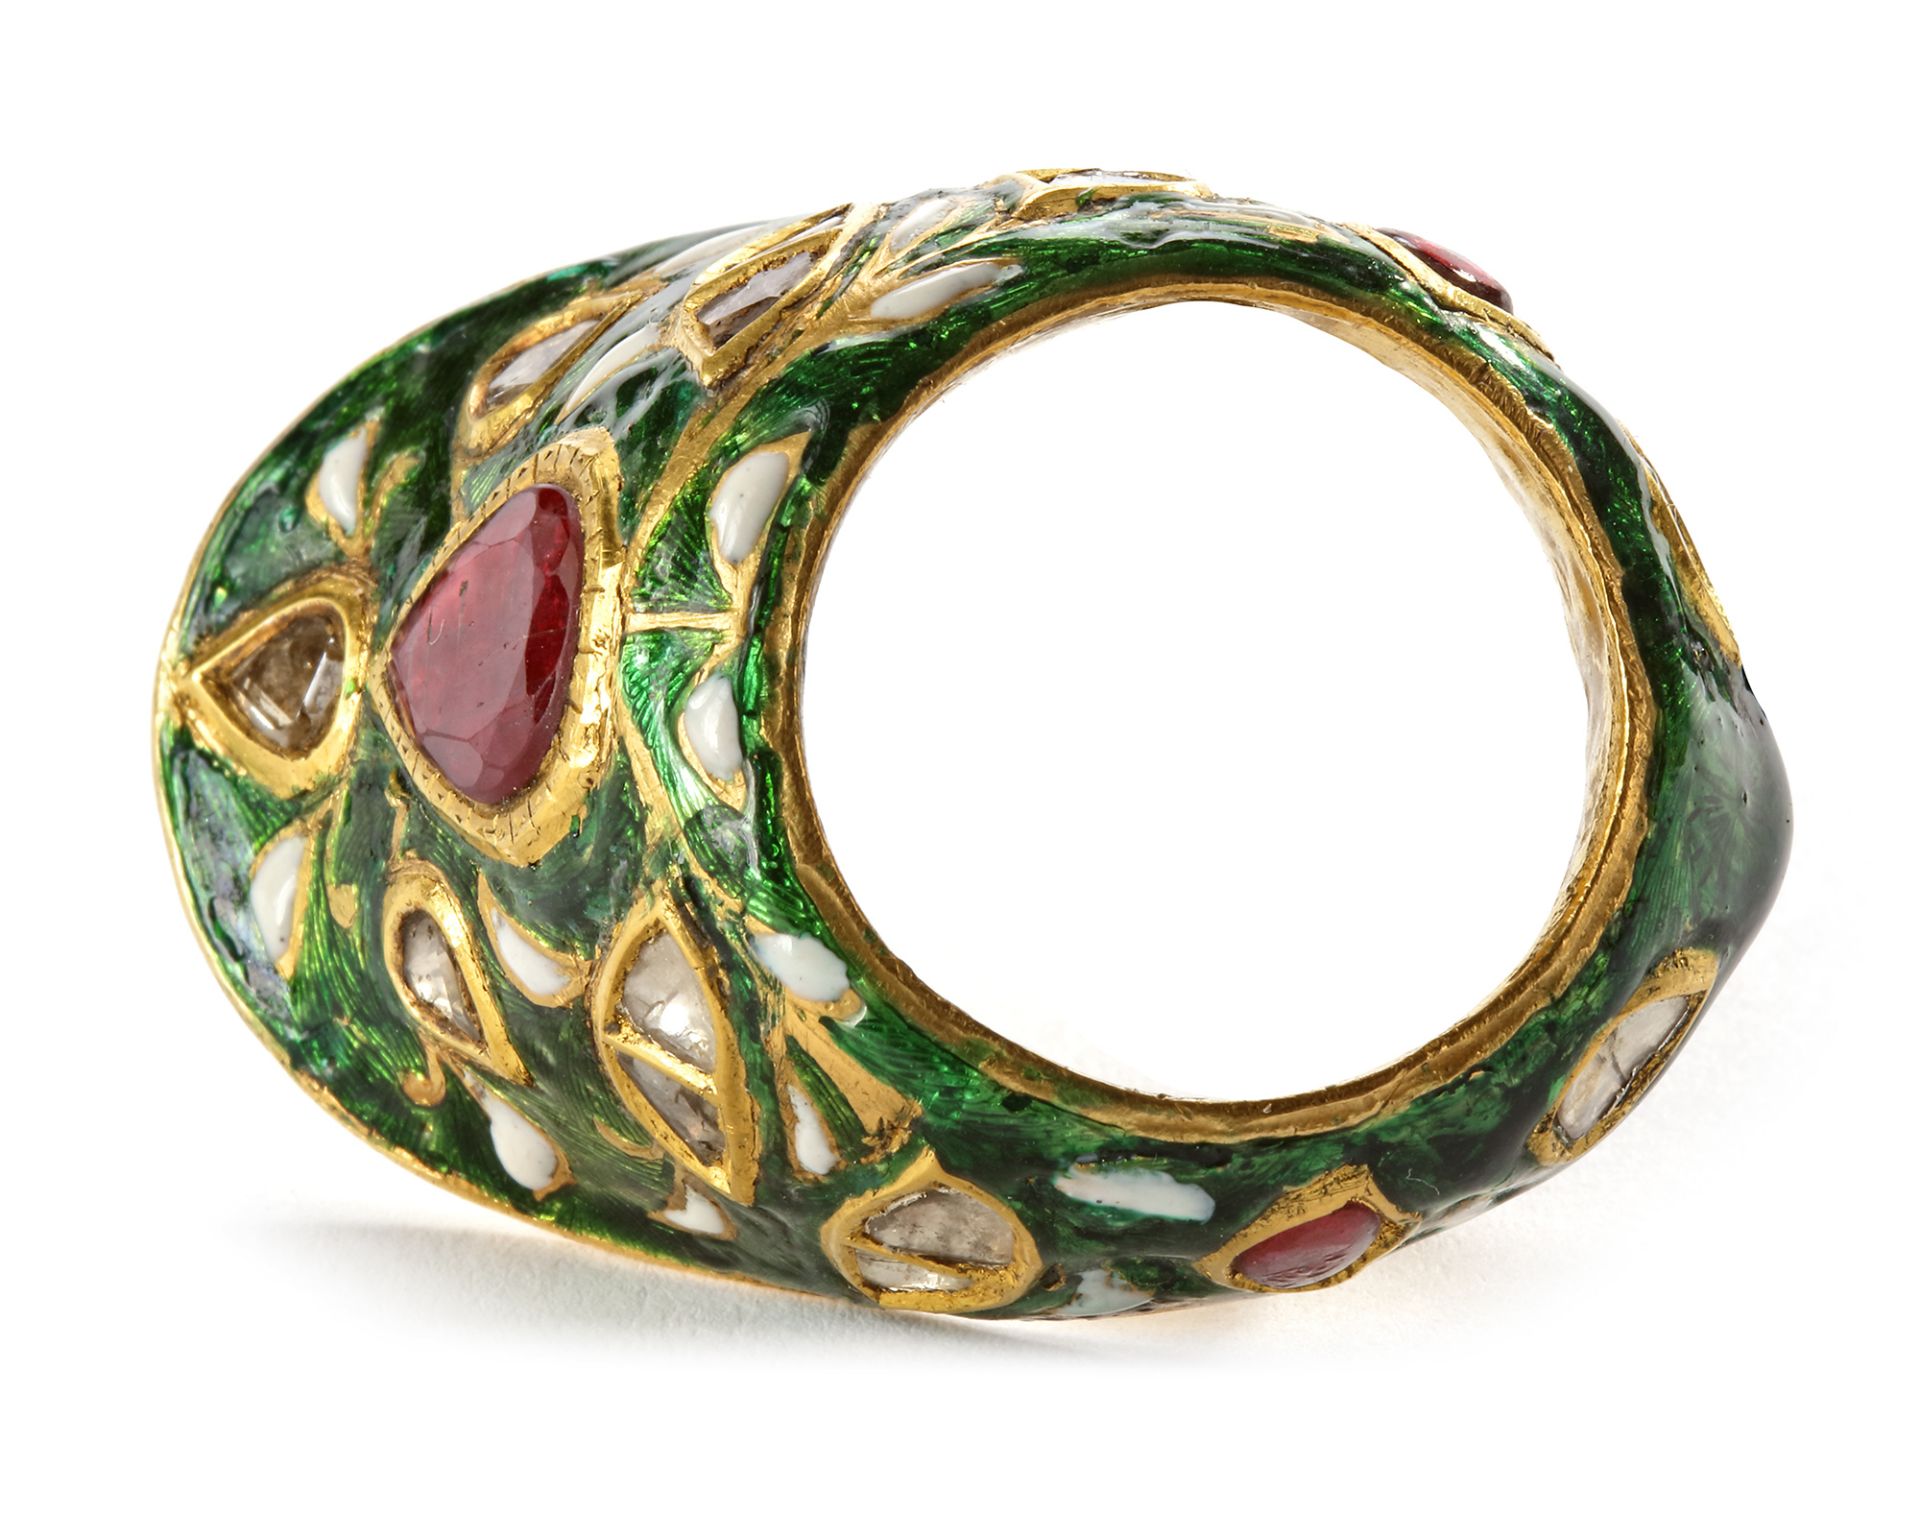 A GEM-SET AND ENAMELLED GOLD ARCHER'S RING, NORTH INDIA, CIRCA 18TH CENTURY - Image 3 of 4